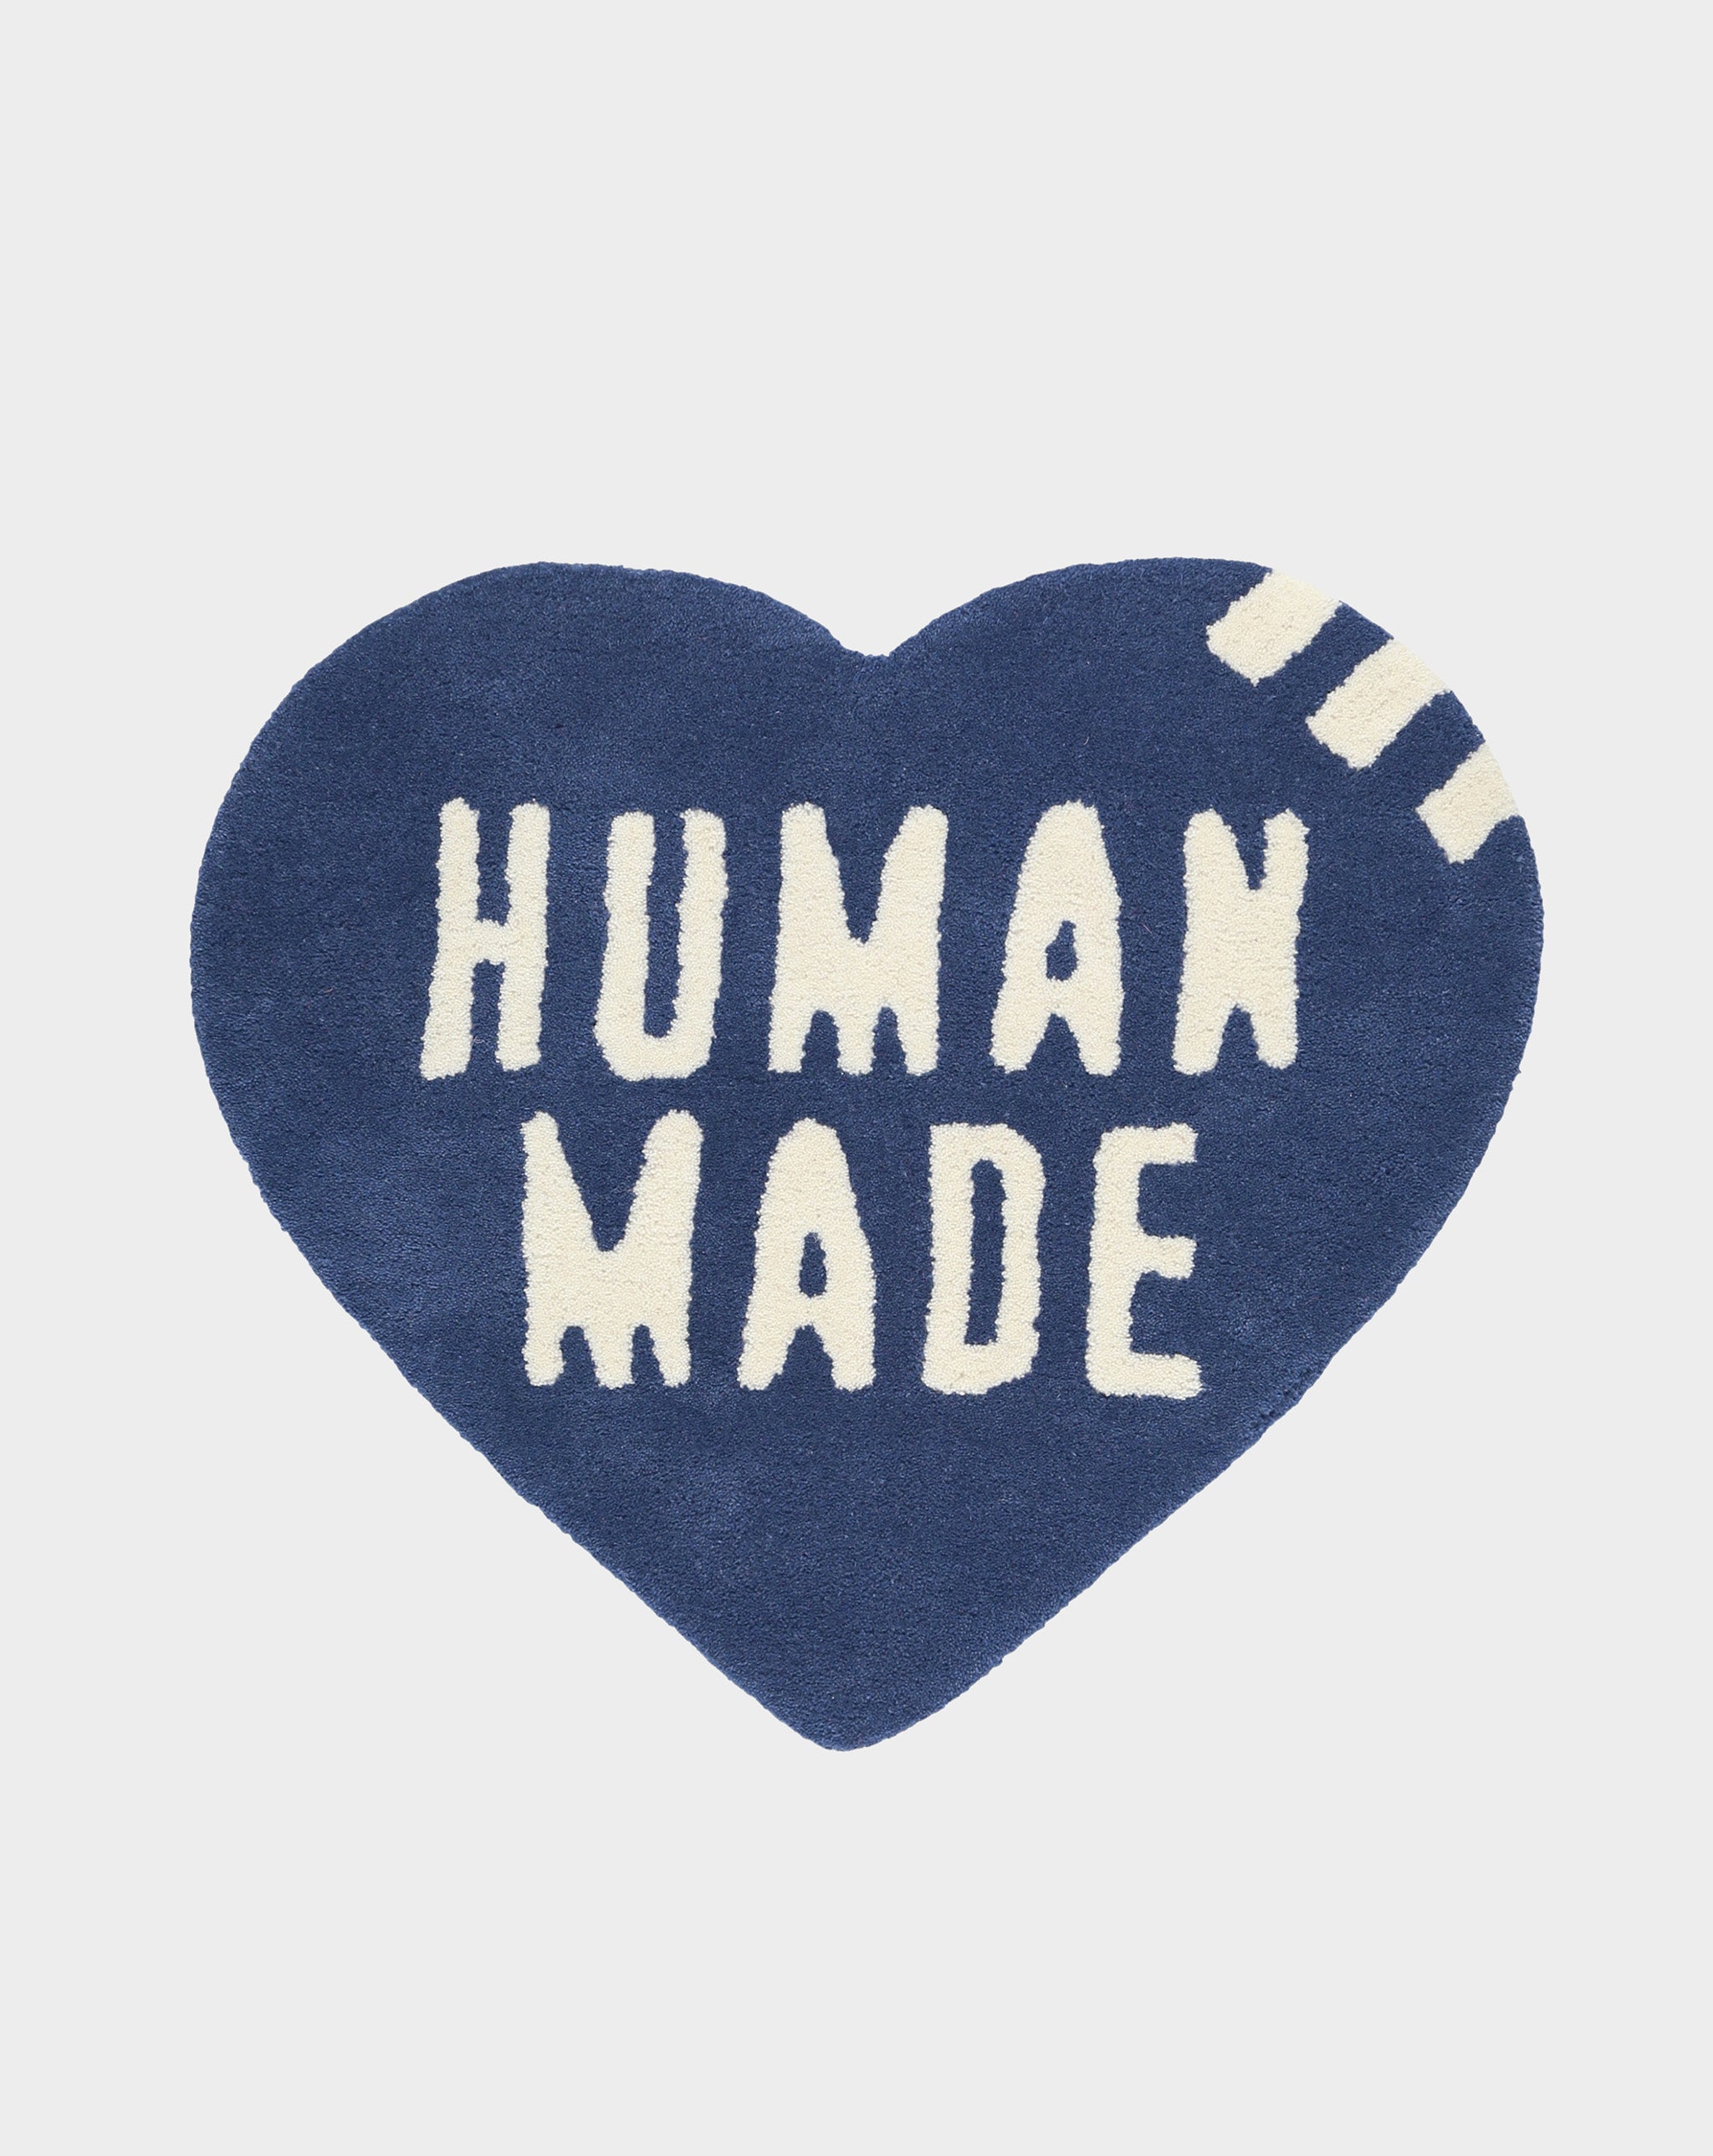 Human Made Re-Edition - Issue 18  - Cheap 127-0 Jordan outlet